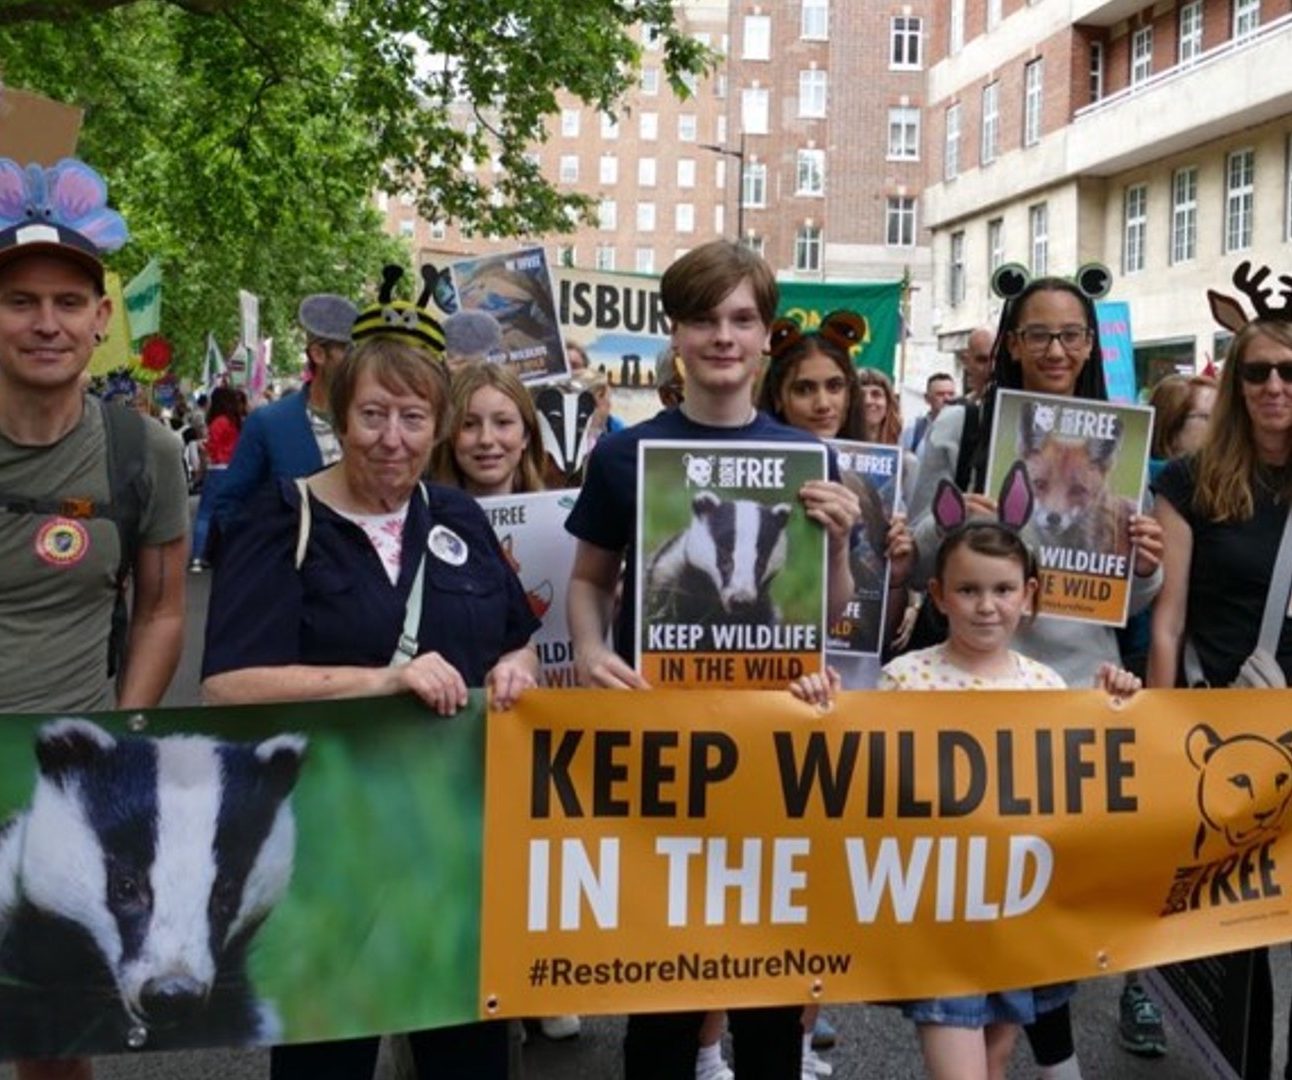 A crowd of people at a demonstration holding banners with images of wildlife on them